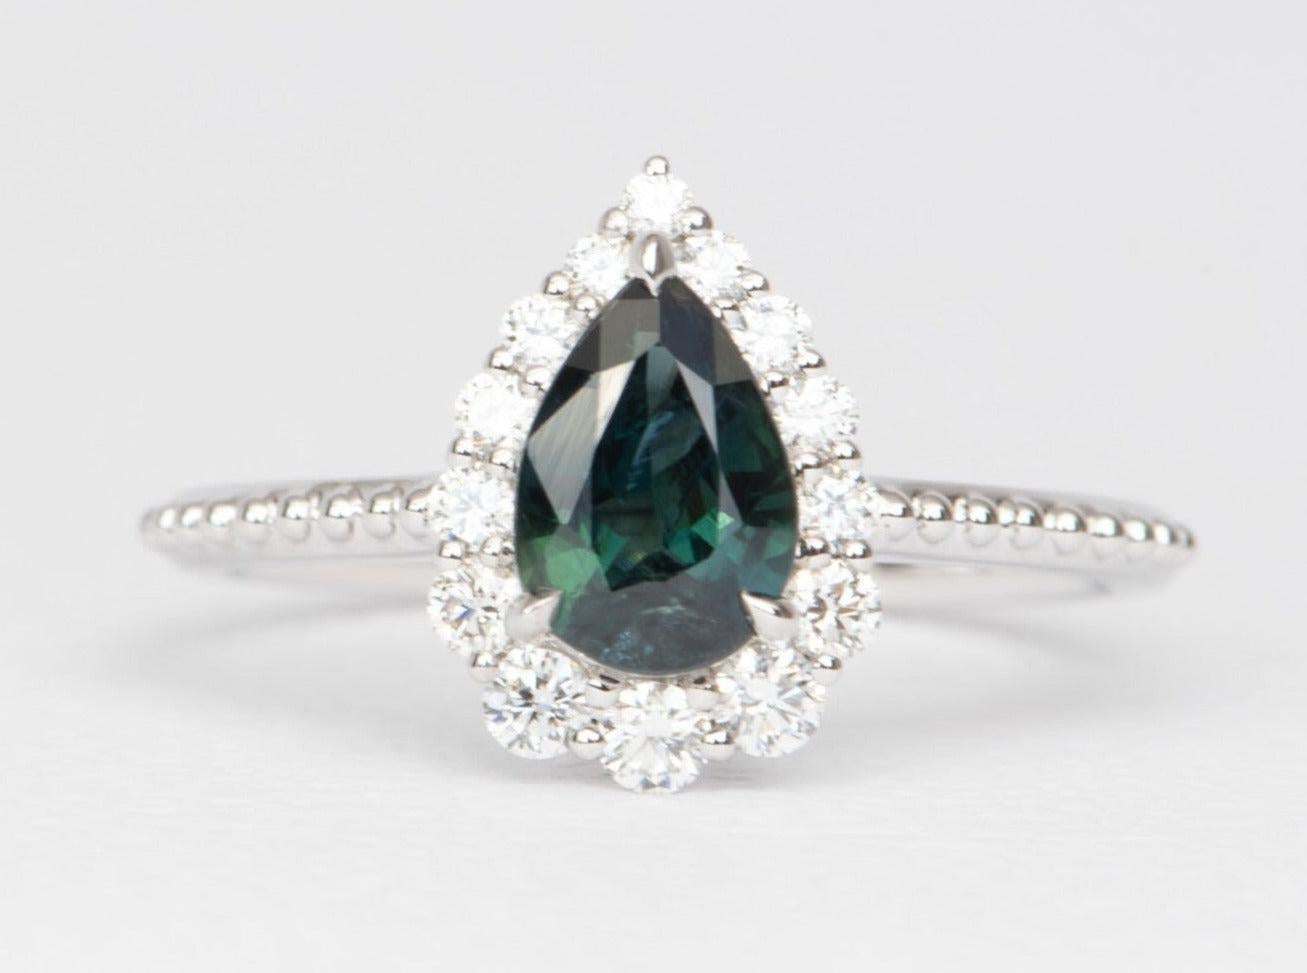 ♥ Solid 14k white gold ring set with a beautiful pear-shaped teal blue Nigerian sapphire with diamond halo
♥ Gorgeous teal blue color!
♥ The item measures 12.5 mm in length, 8.7 mm in width, and stands 6.3 mm from the finger

♥ US Size 7 (Free